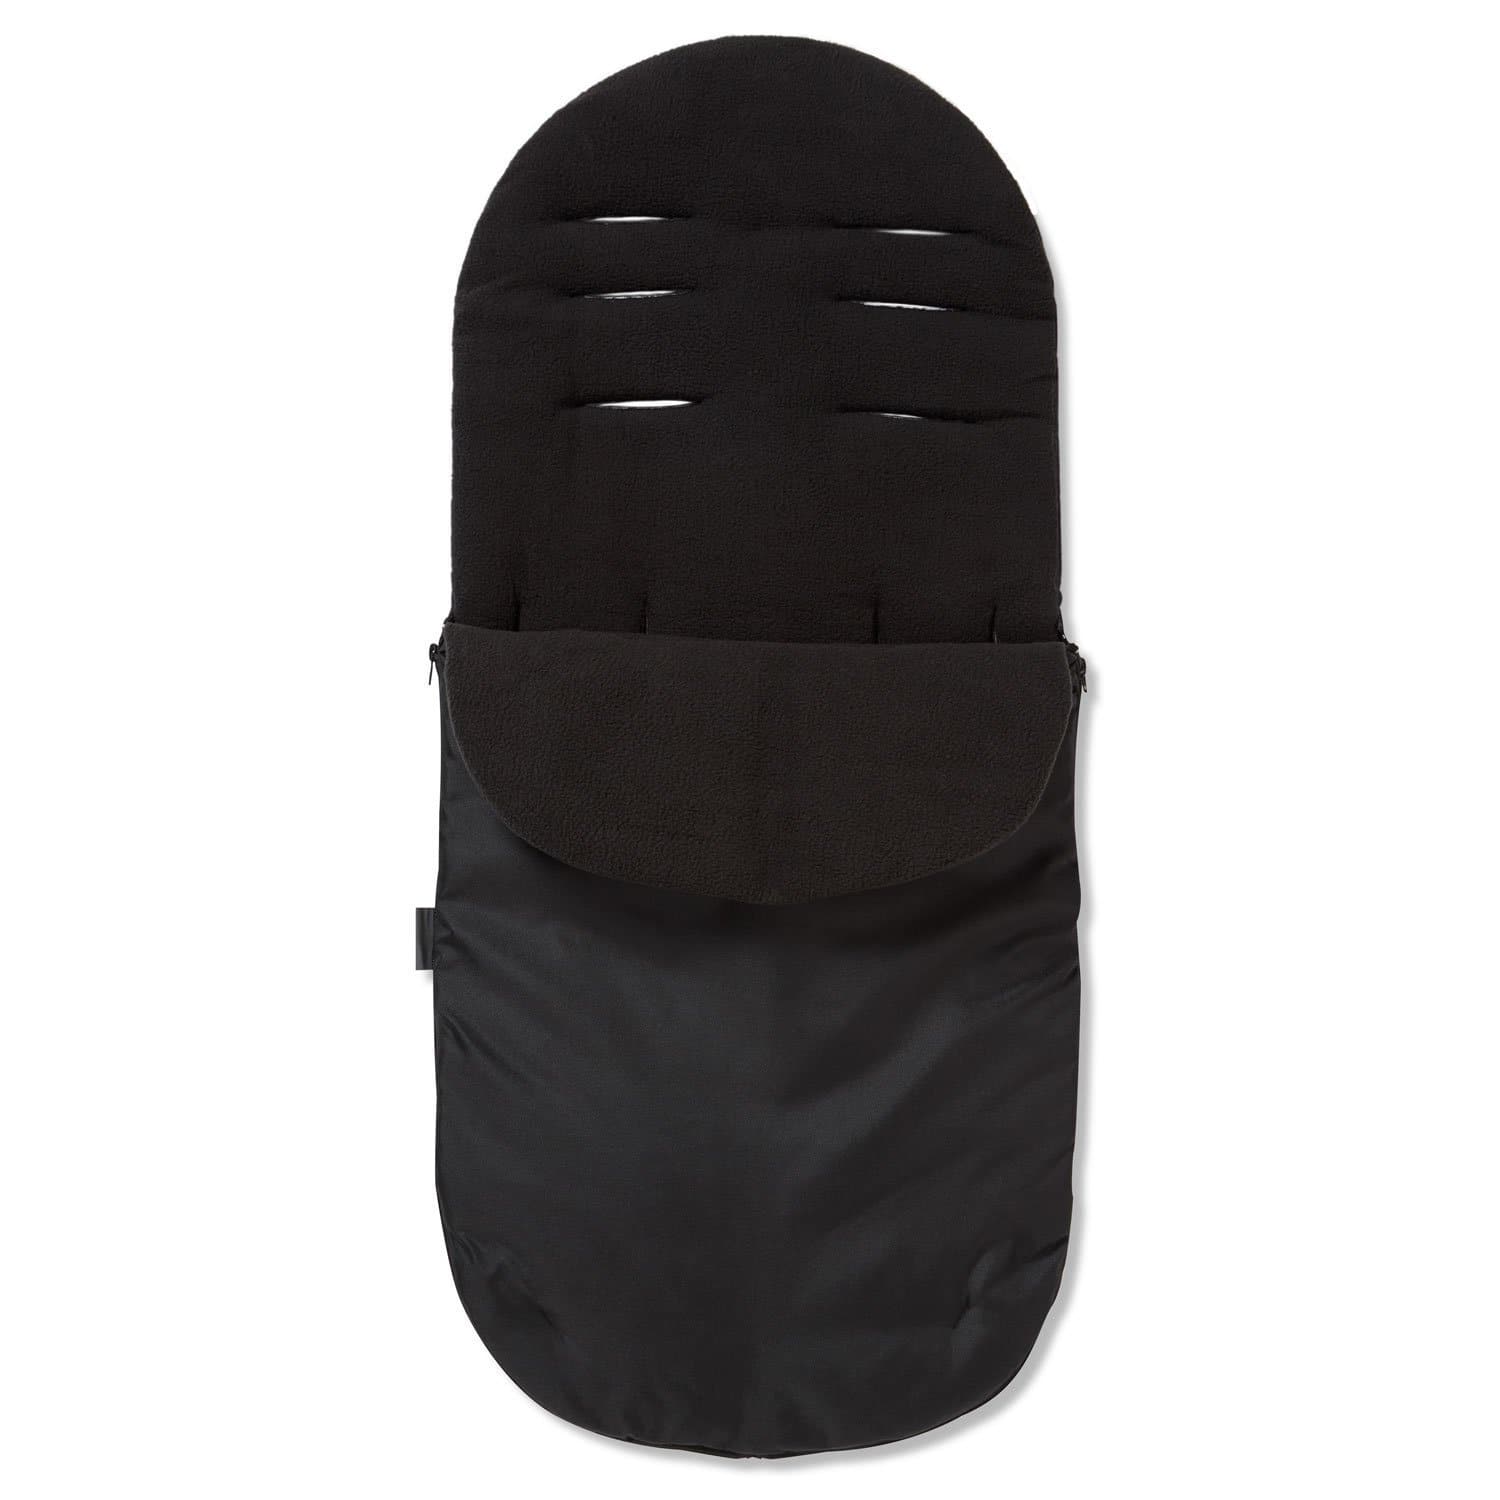 Footmuff / Cosy Toes Compatible with Ickle Bubba - Black / Fits All Models | For Your Little One